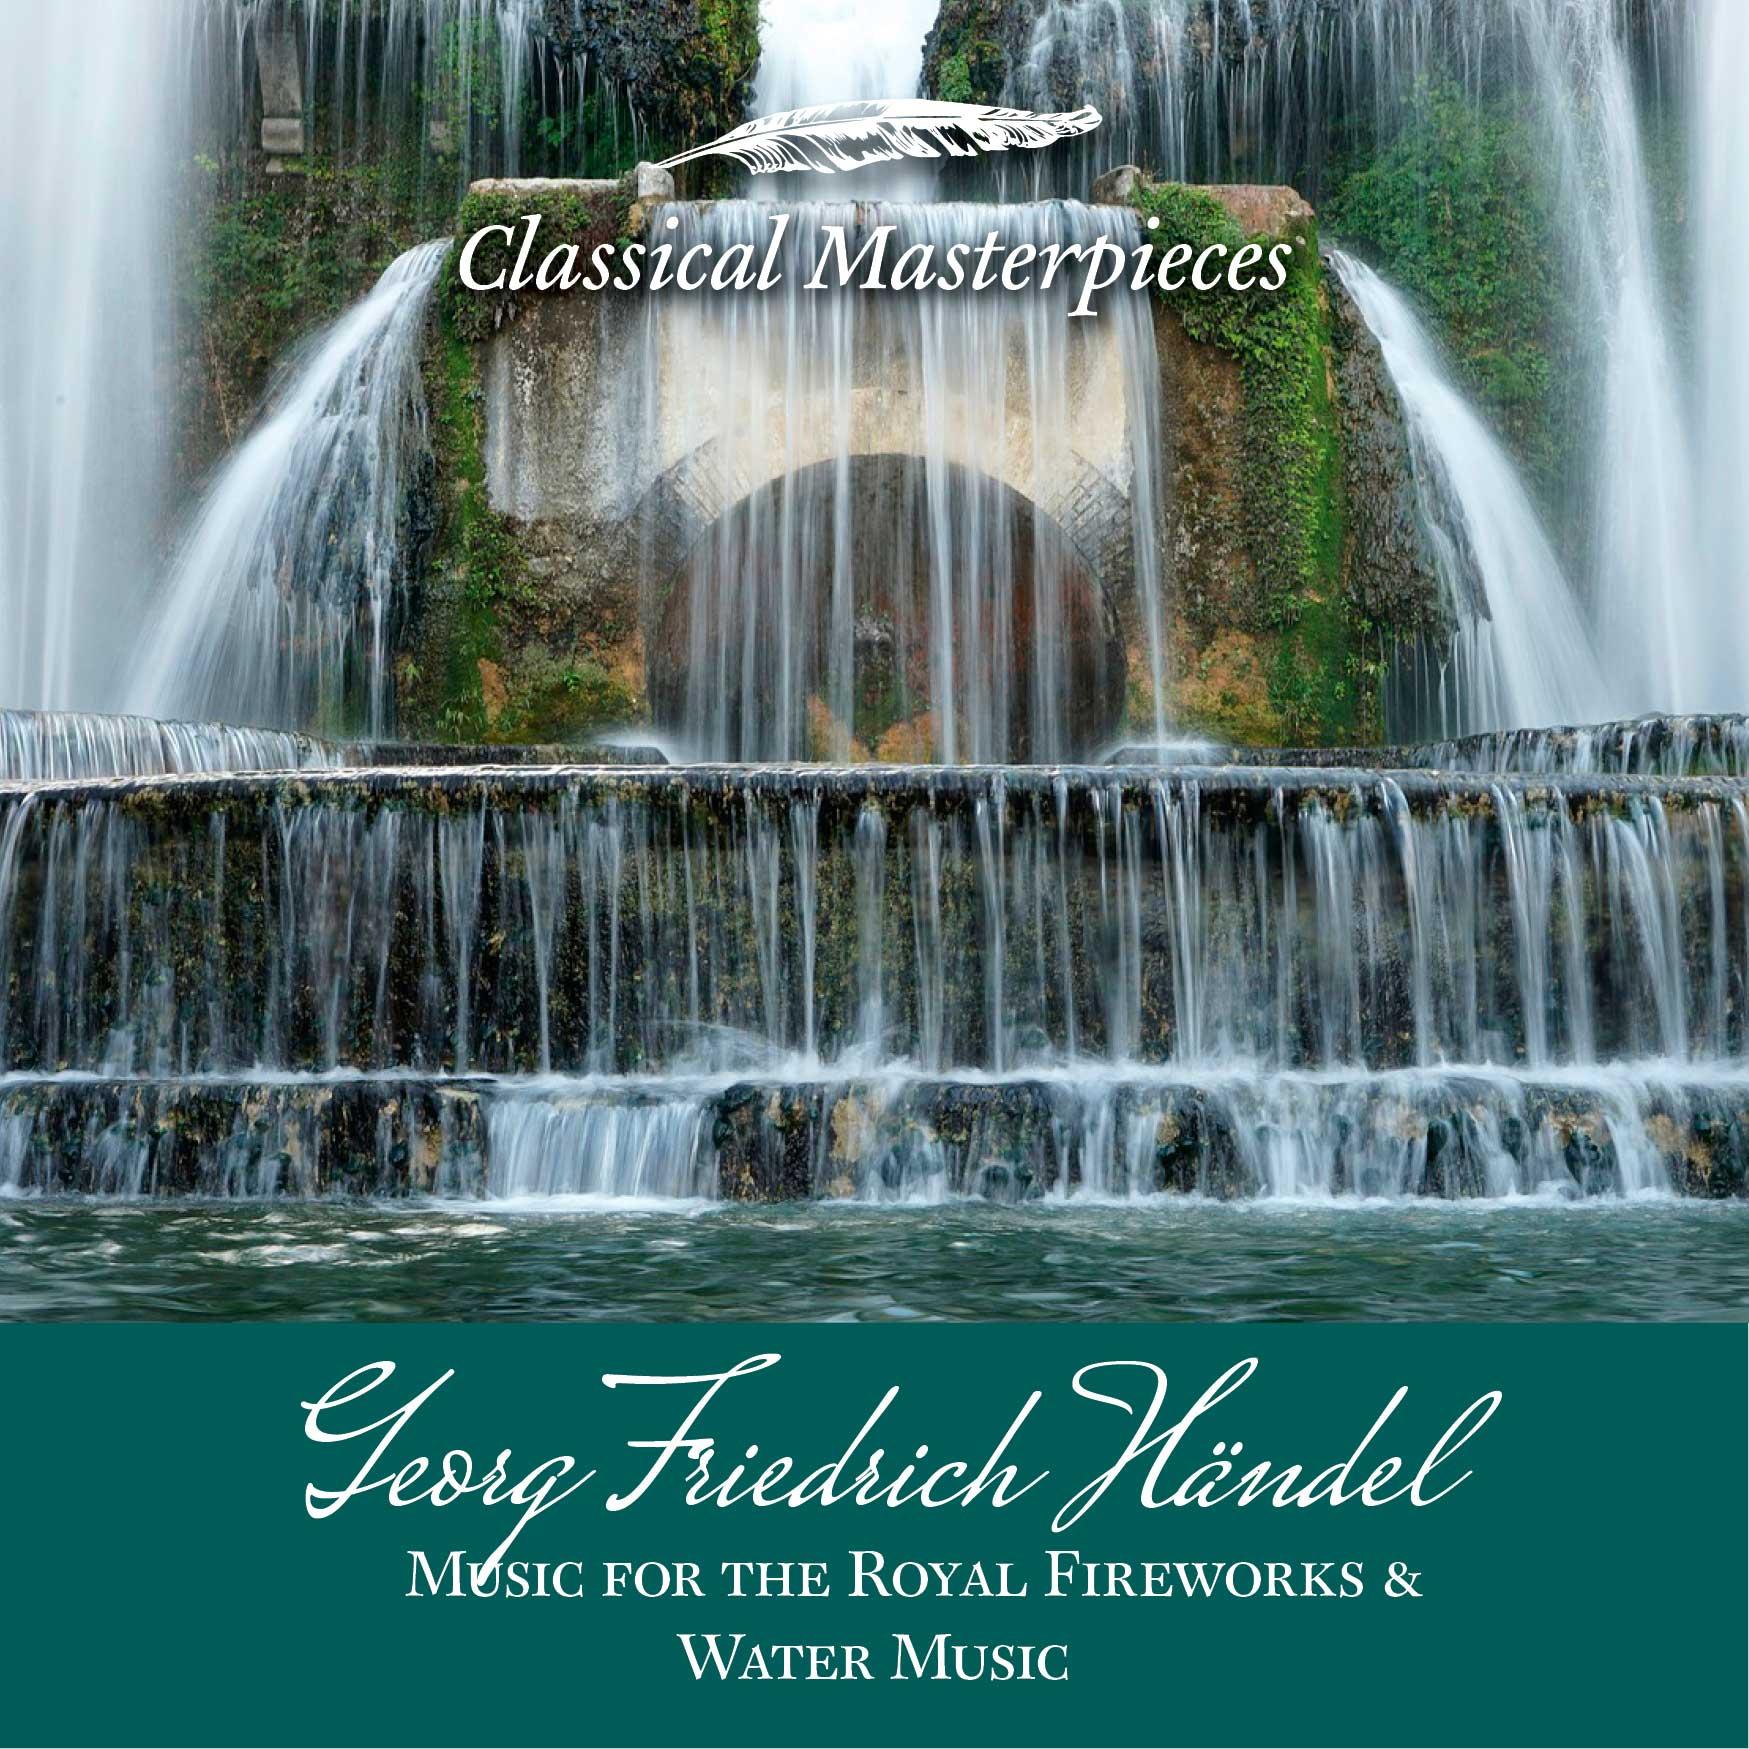 Georg Friedrich H ndel: Music for the Royal Fireworks Water Music